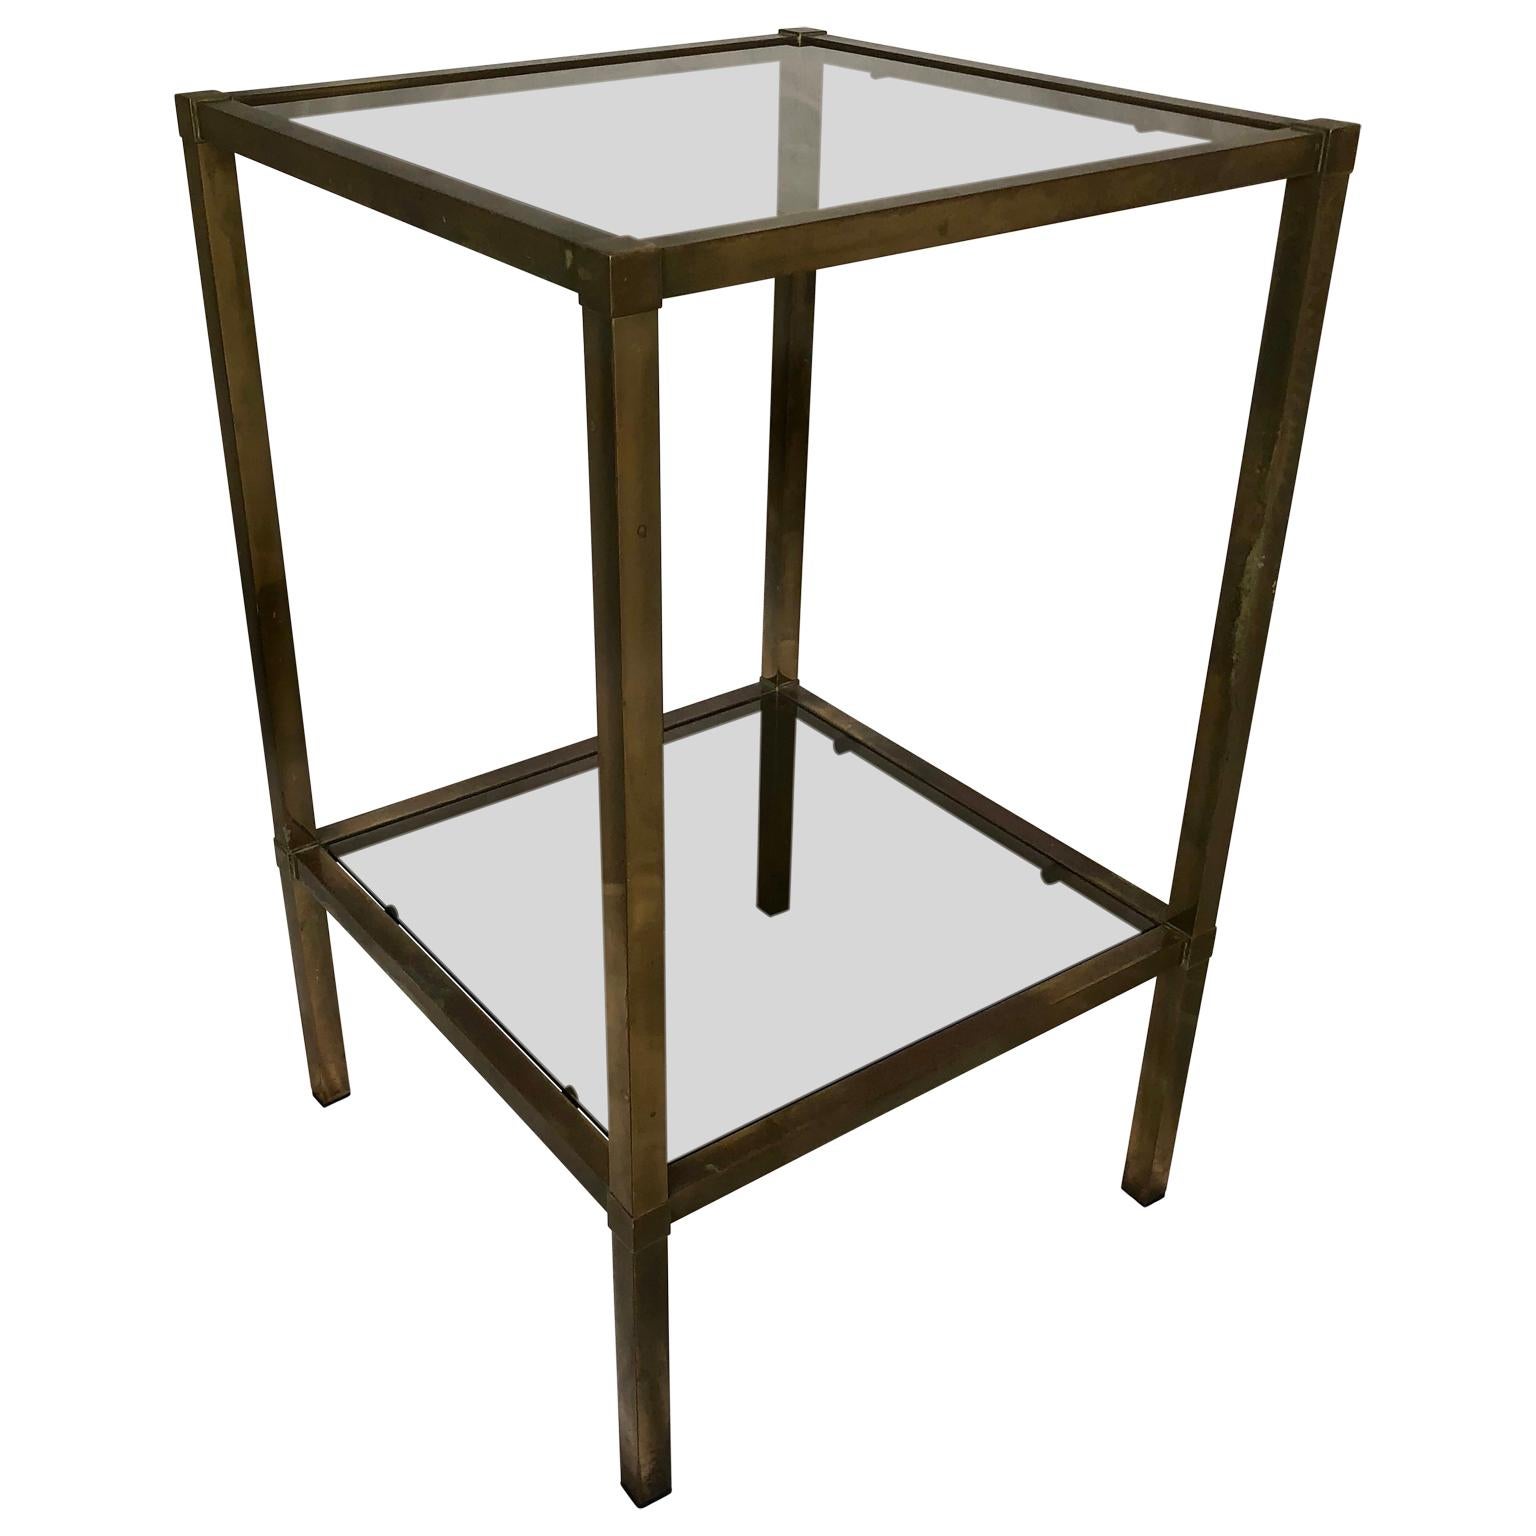 20th Century Small Square Italian Brass Glass-Top Mid-Century Modern Side Table